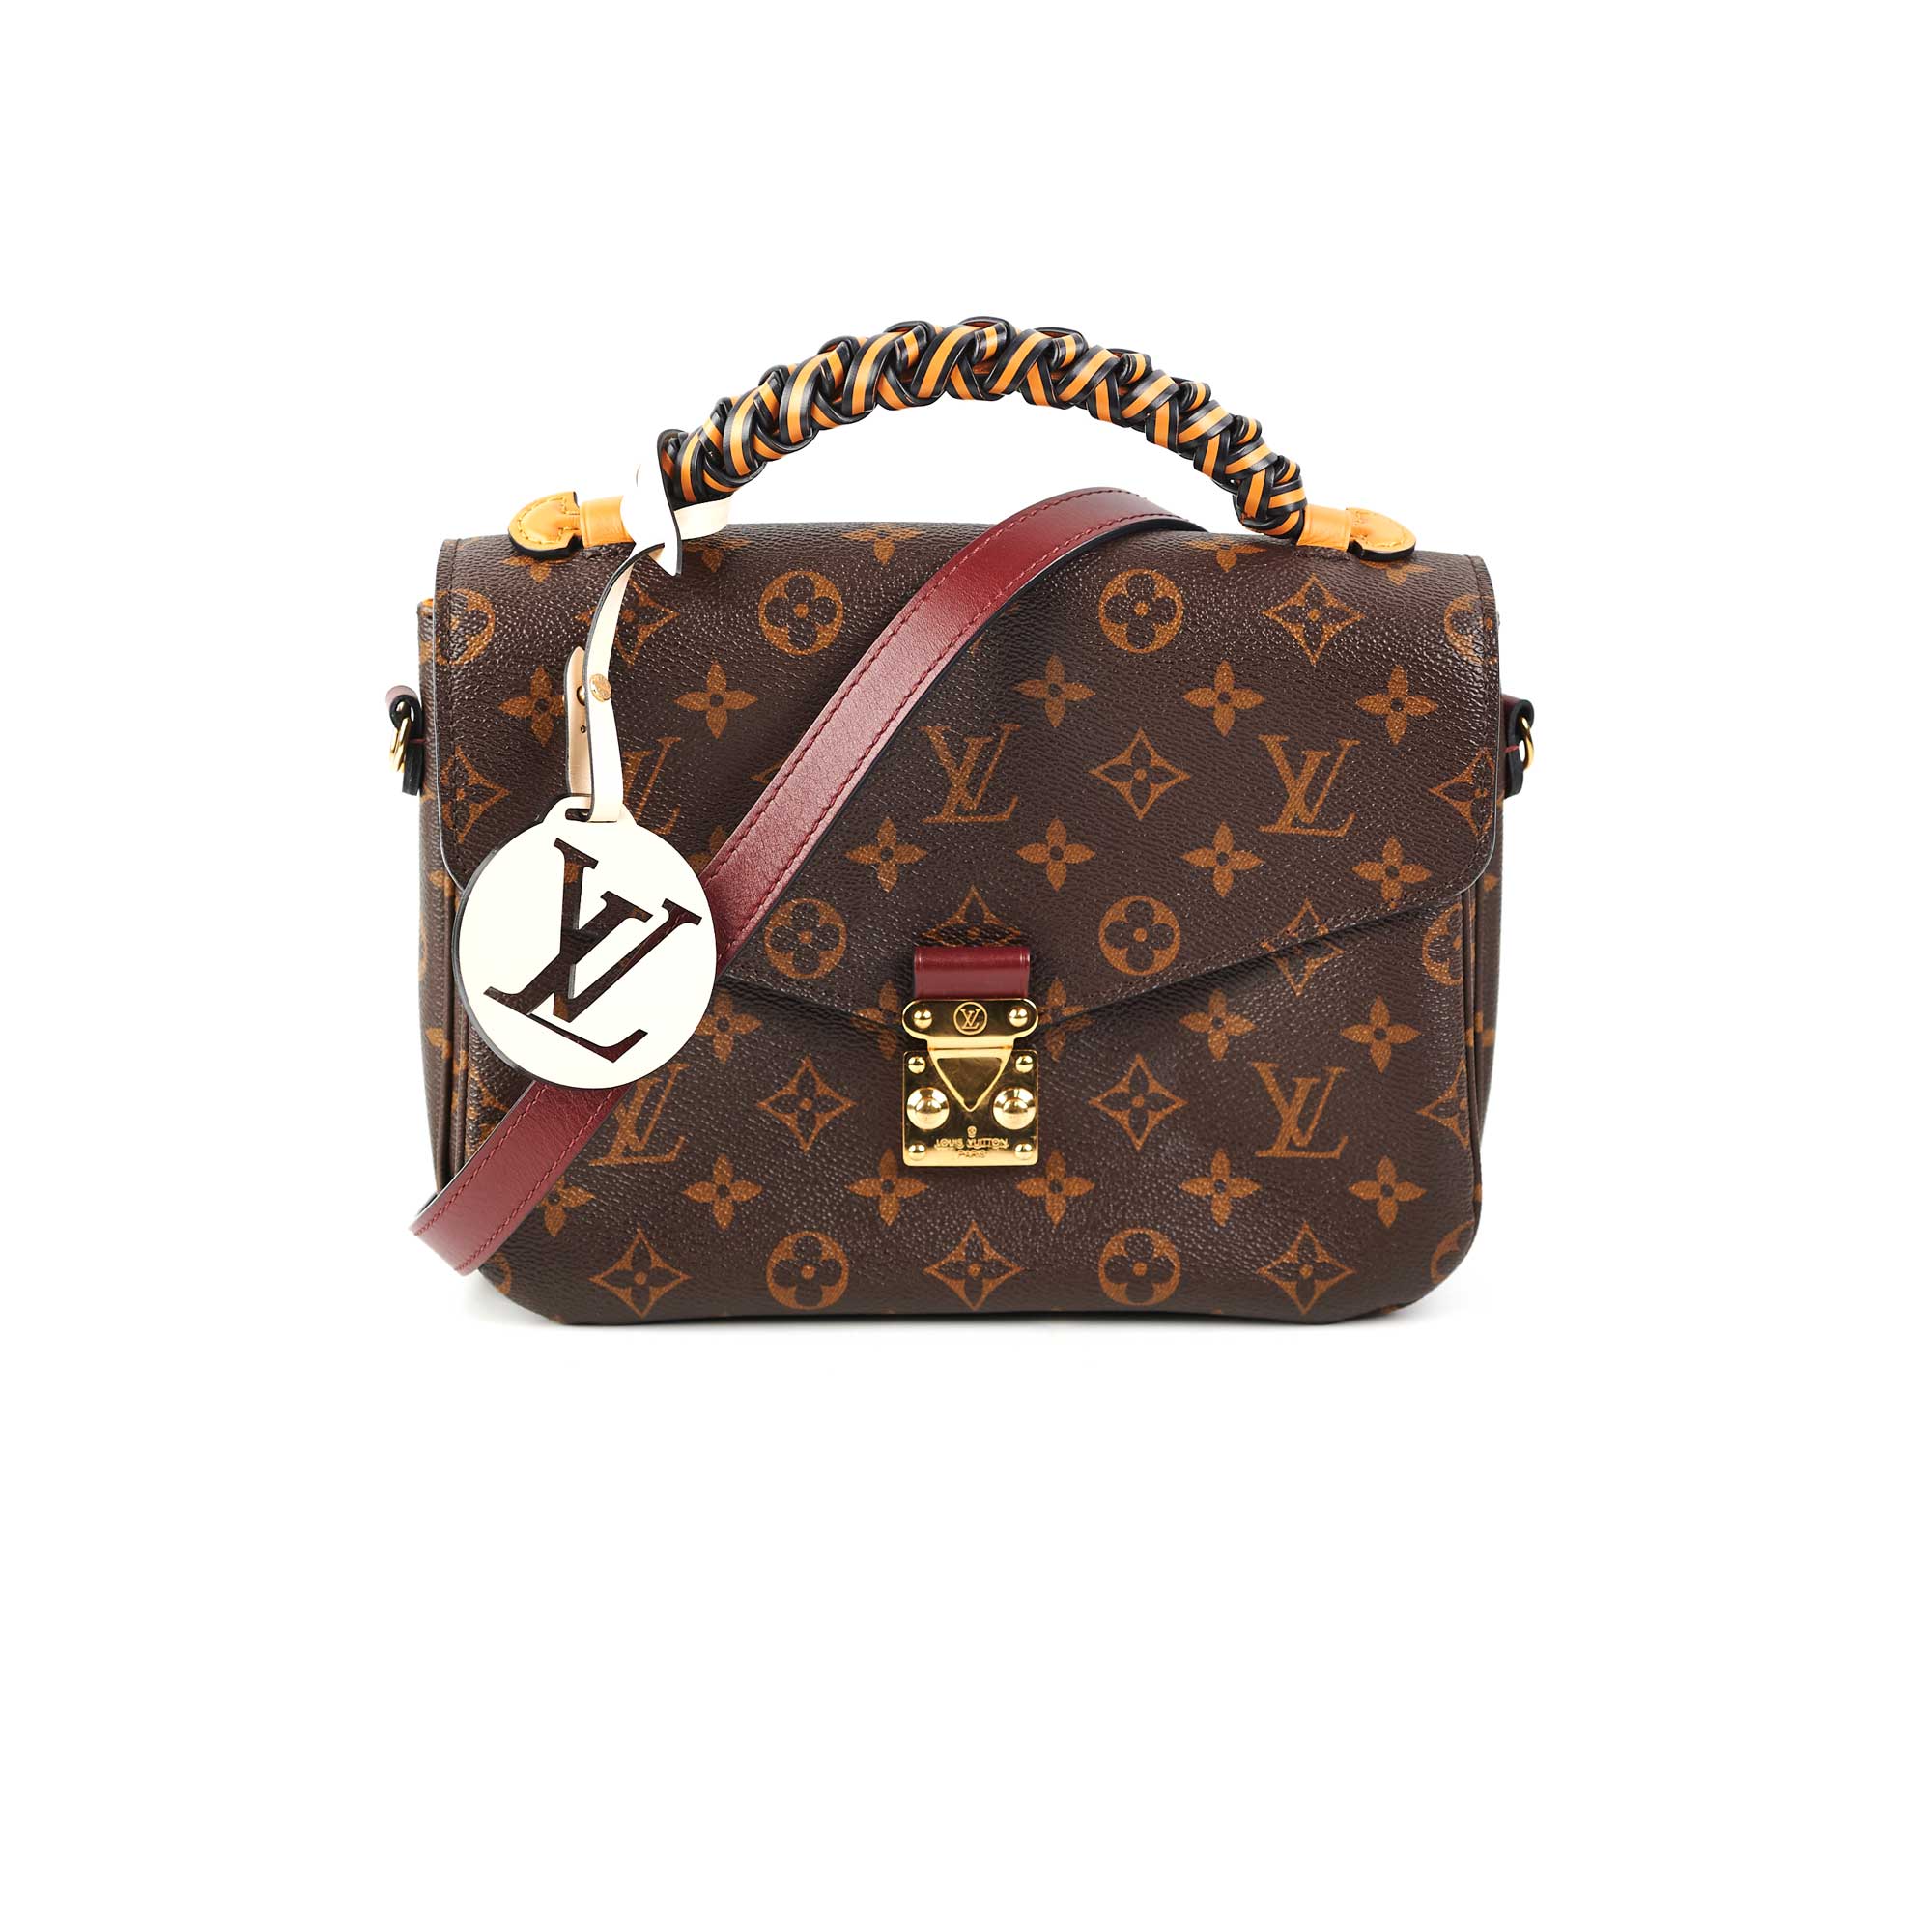 LOUIS VUITTON Monogram Metis Available in January 2013